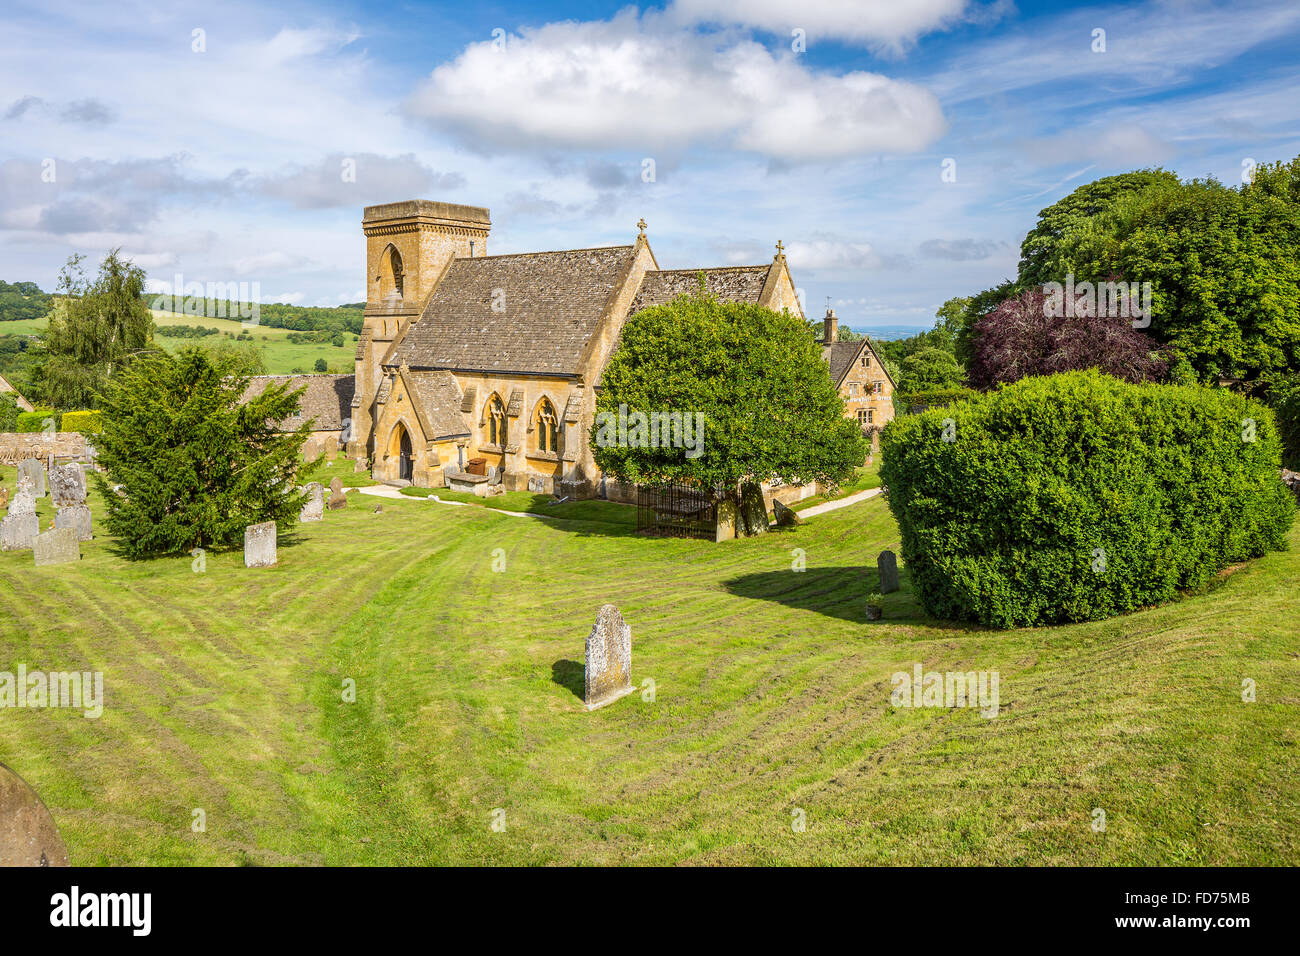 St Barnabas Church at Snowshill, Cotswolds, Gloucestershire, England, United Kingdom, Europe. Stock Photo